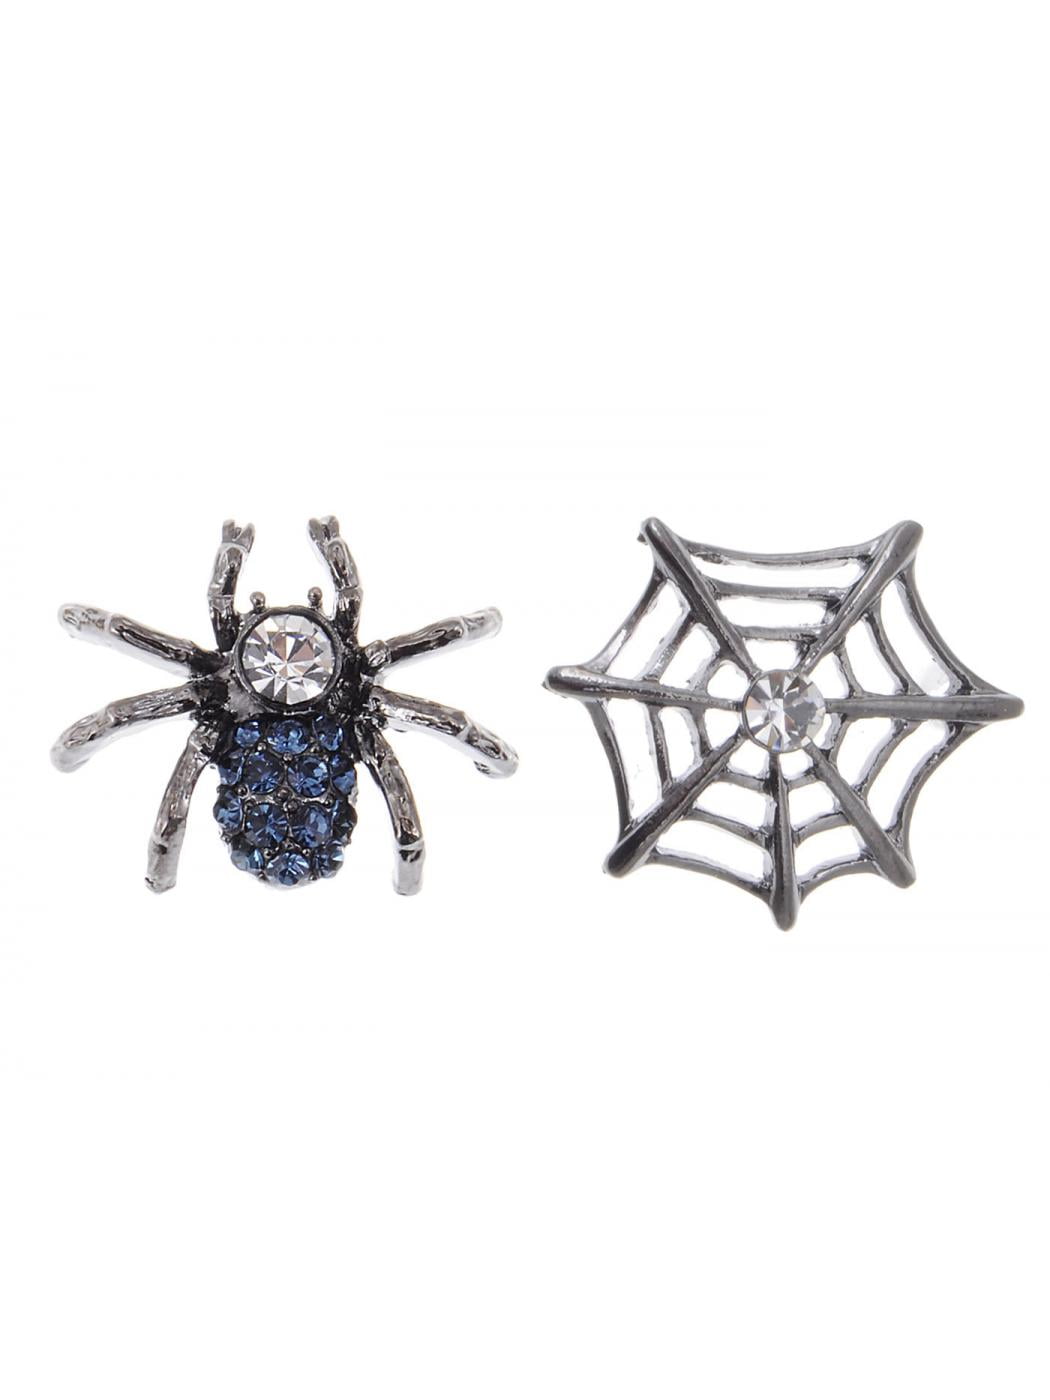 Halloween Costumes for Women Girls Halloween Stud Earrings for Women Girls Spider Earrings Scary Funny Spider Halloween Decorations Cosplay Party Supplies Favors Gifts